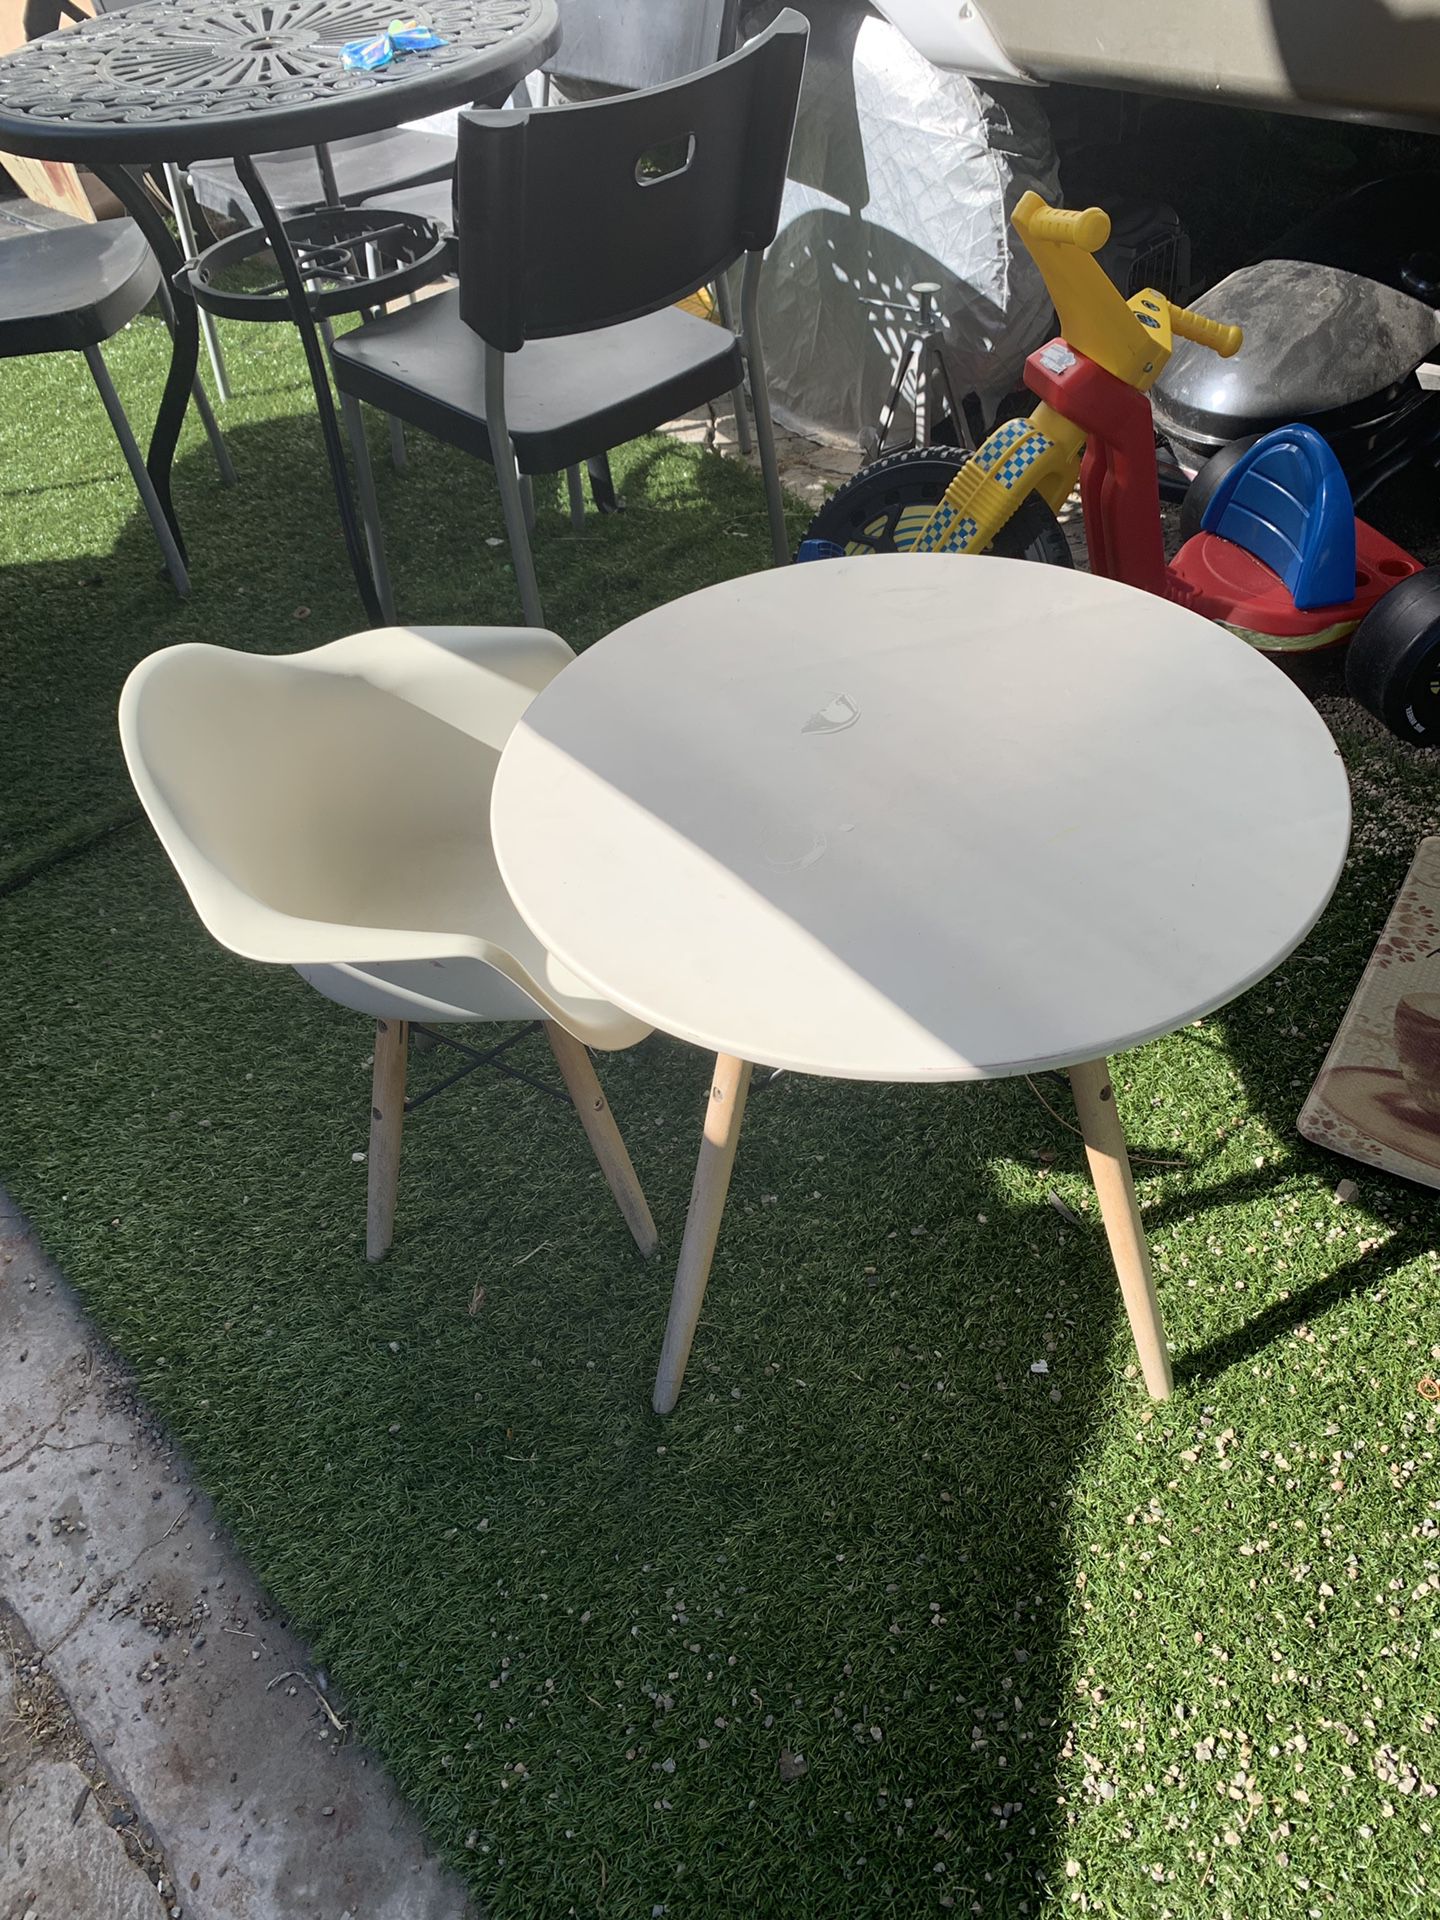 Kids table with chair $25